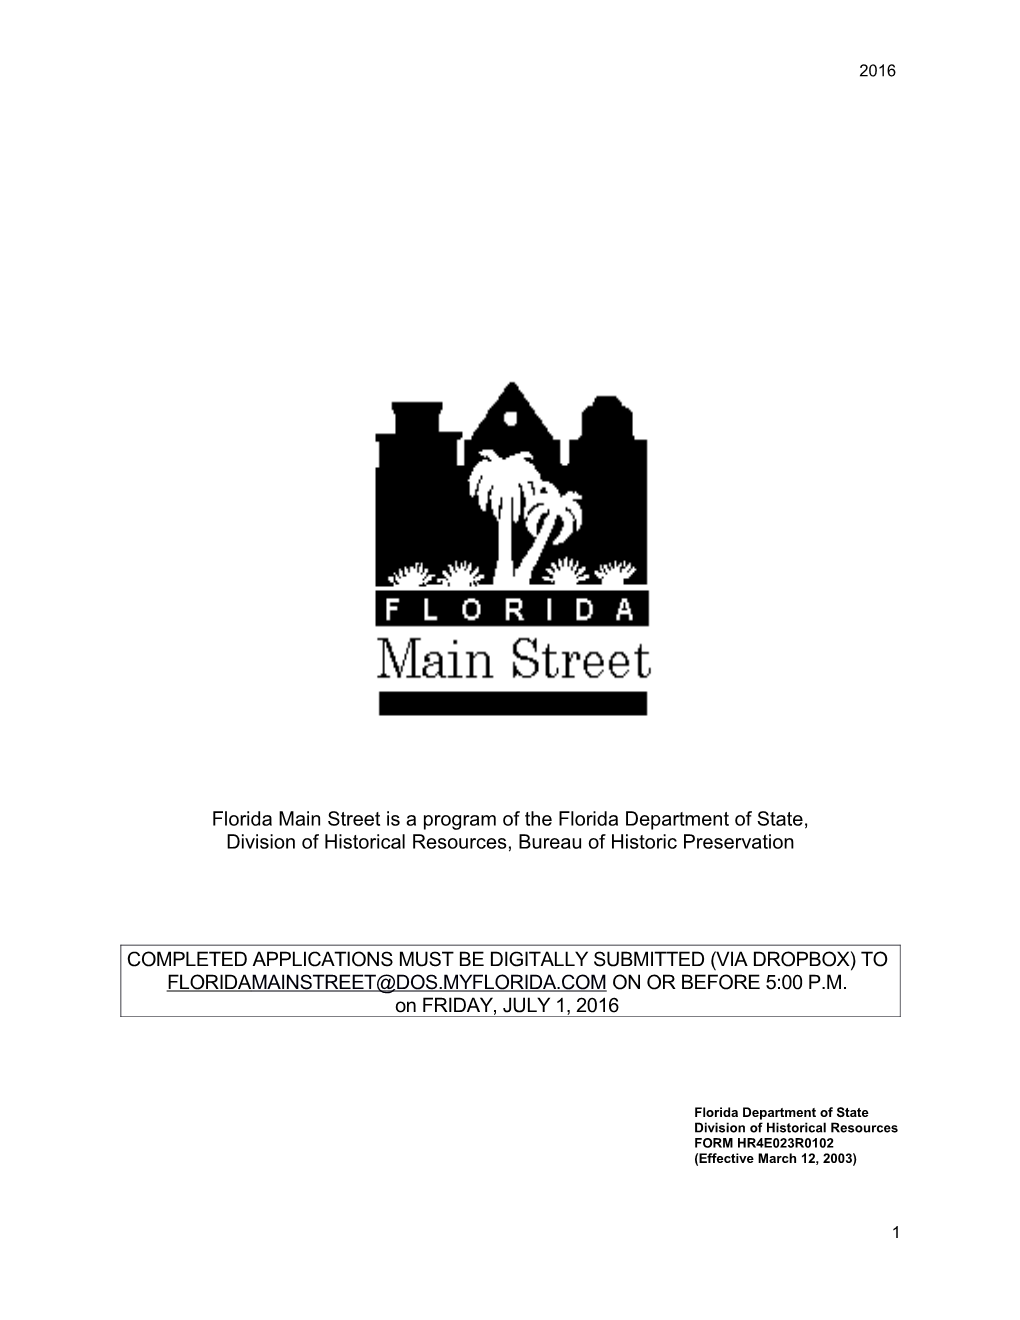 Florida Main Street Is a Program of the Florida Department of State